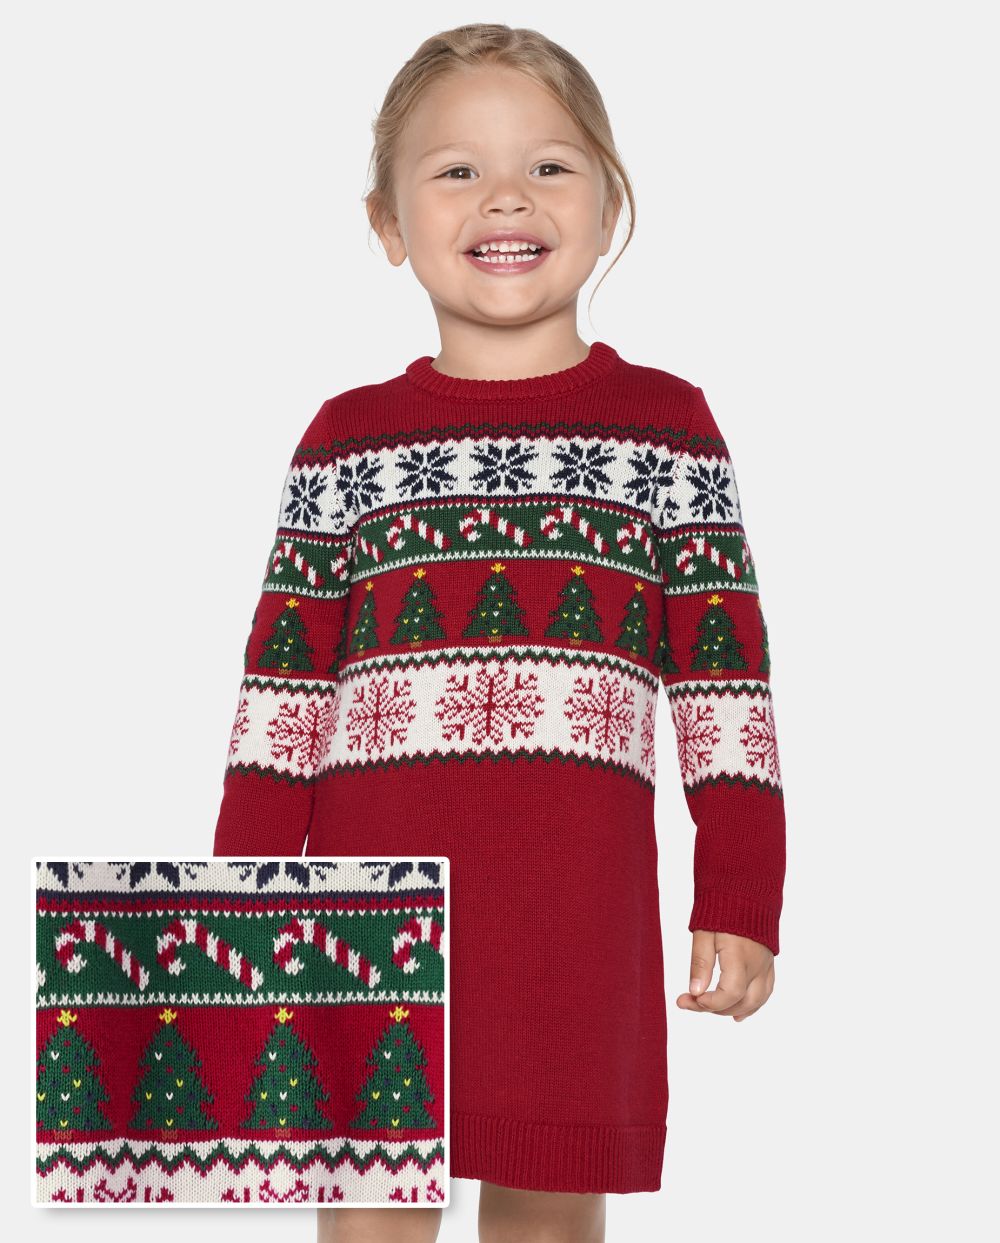 Toddler Baby Long Sleeves Crew Neck Above the Knee Sweater Dress